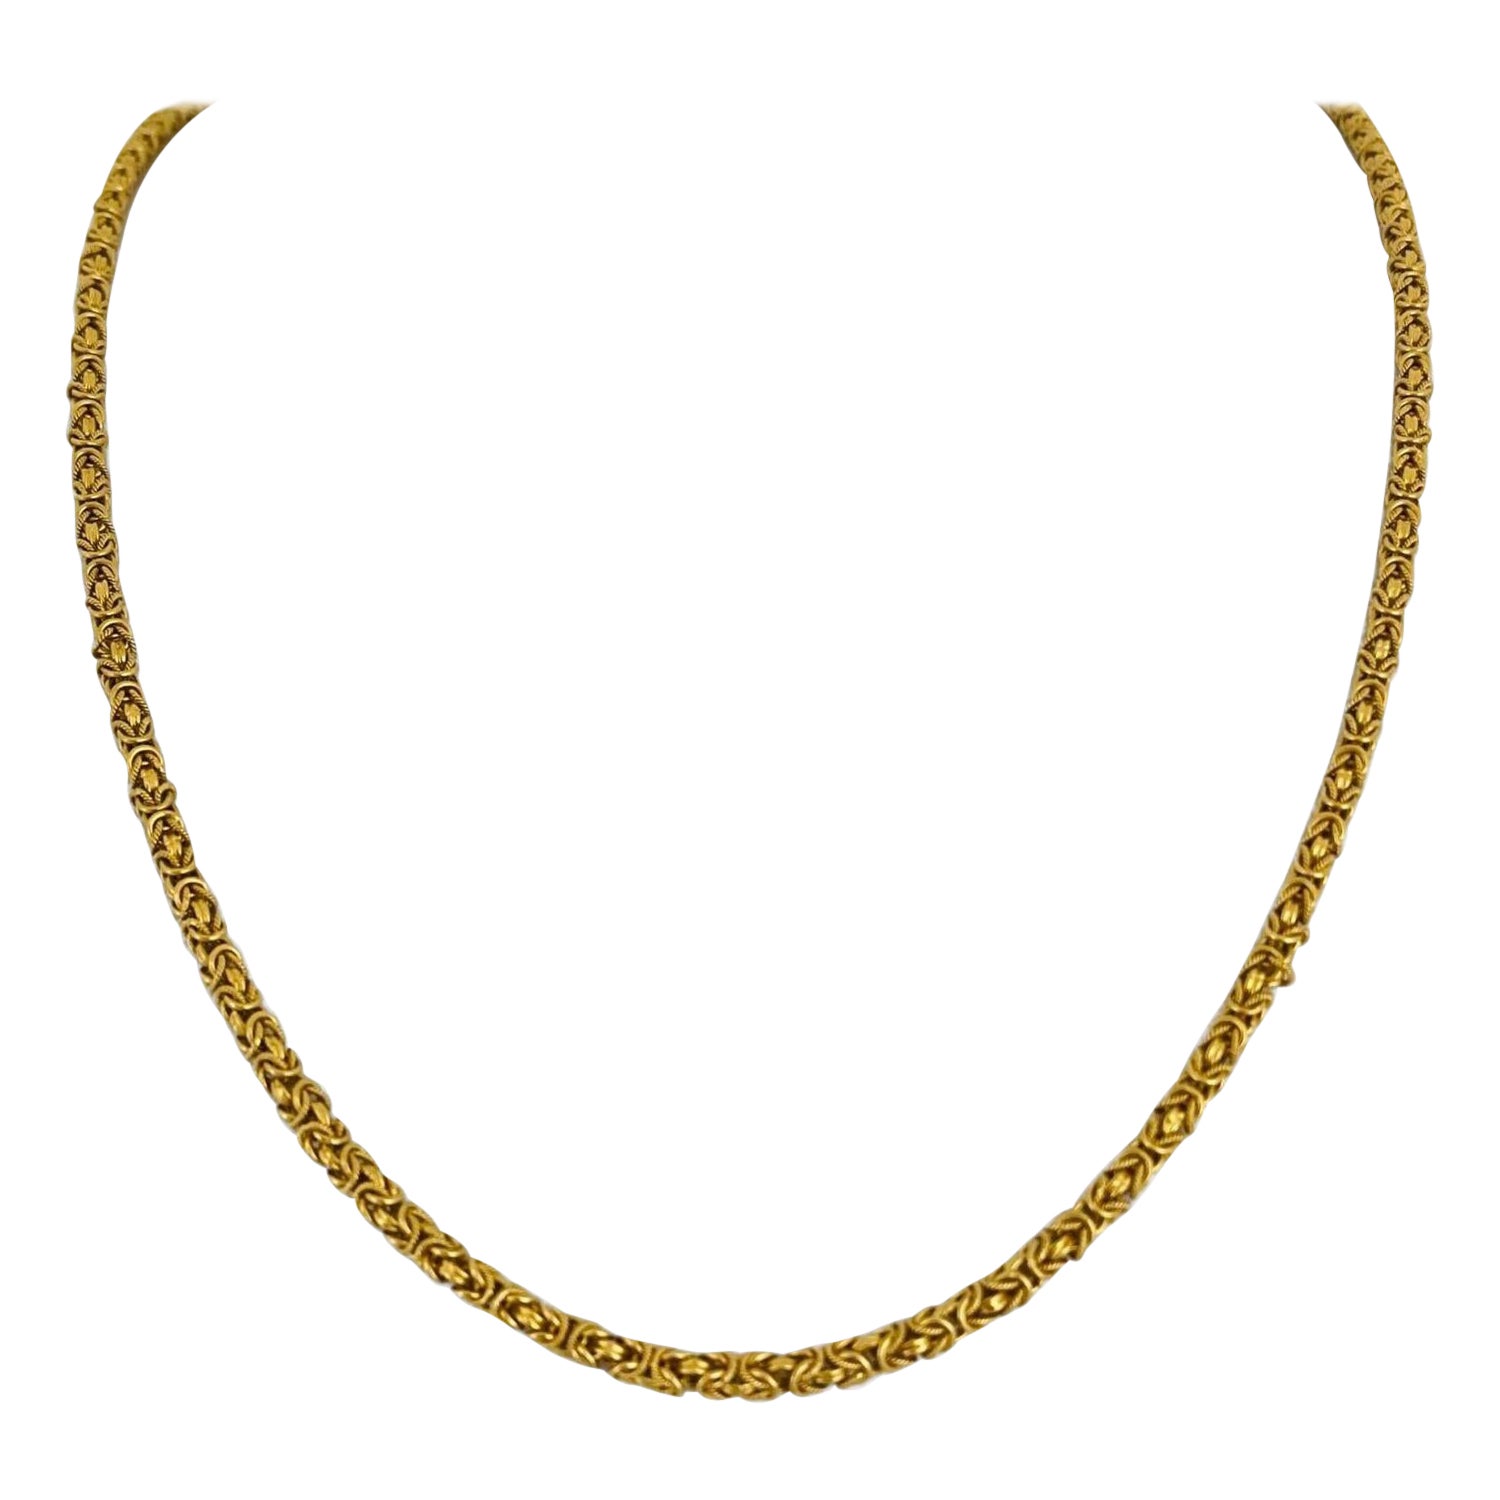 22 Karat Yellow Gold  Solid Heavy Squared Byzantine Link Chain Necklace